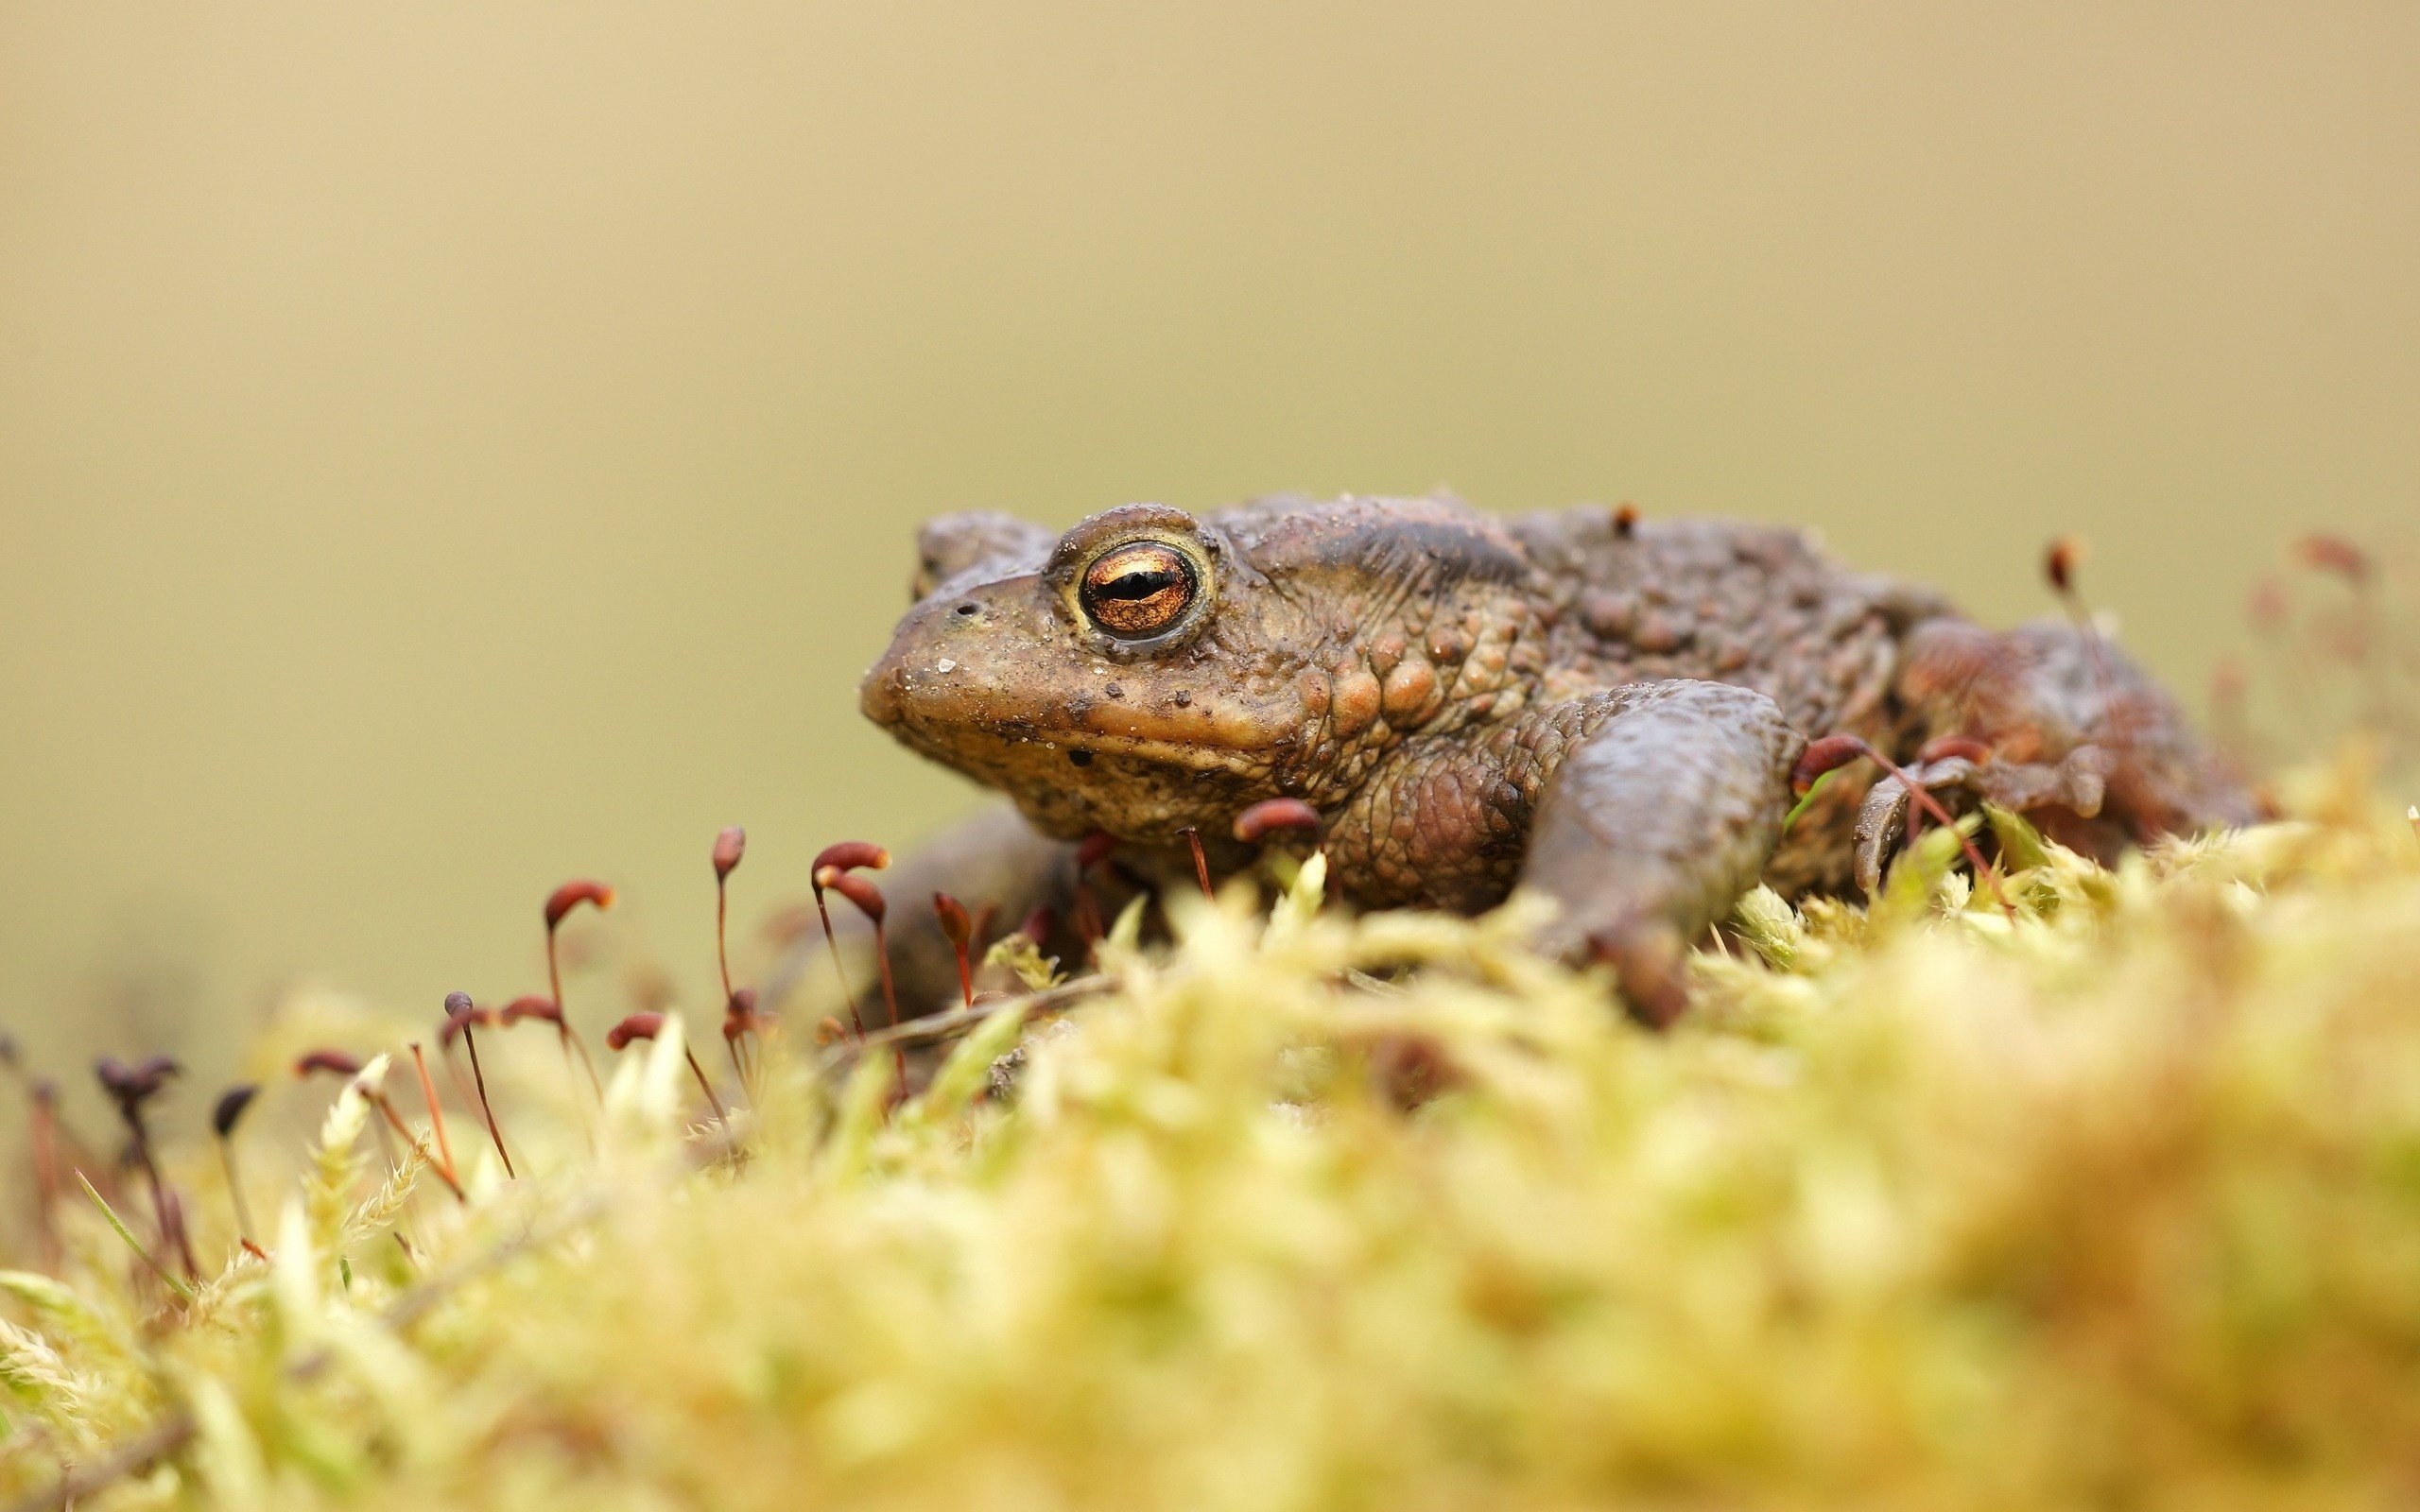 Toad wallpapers, Eclectic collection, Toad species, Nature's harmony, 2560x1600 HD Desktop